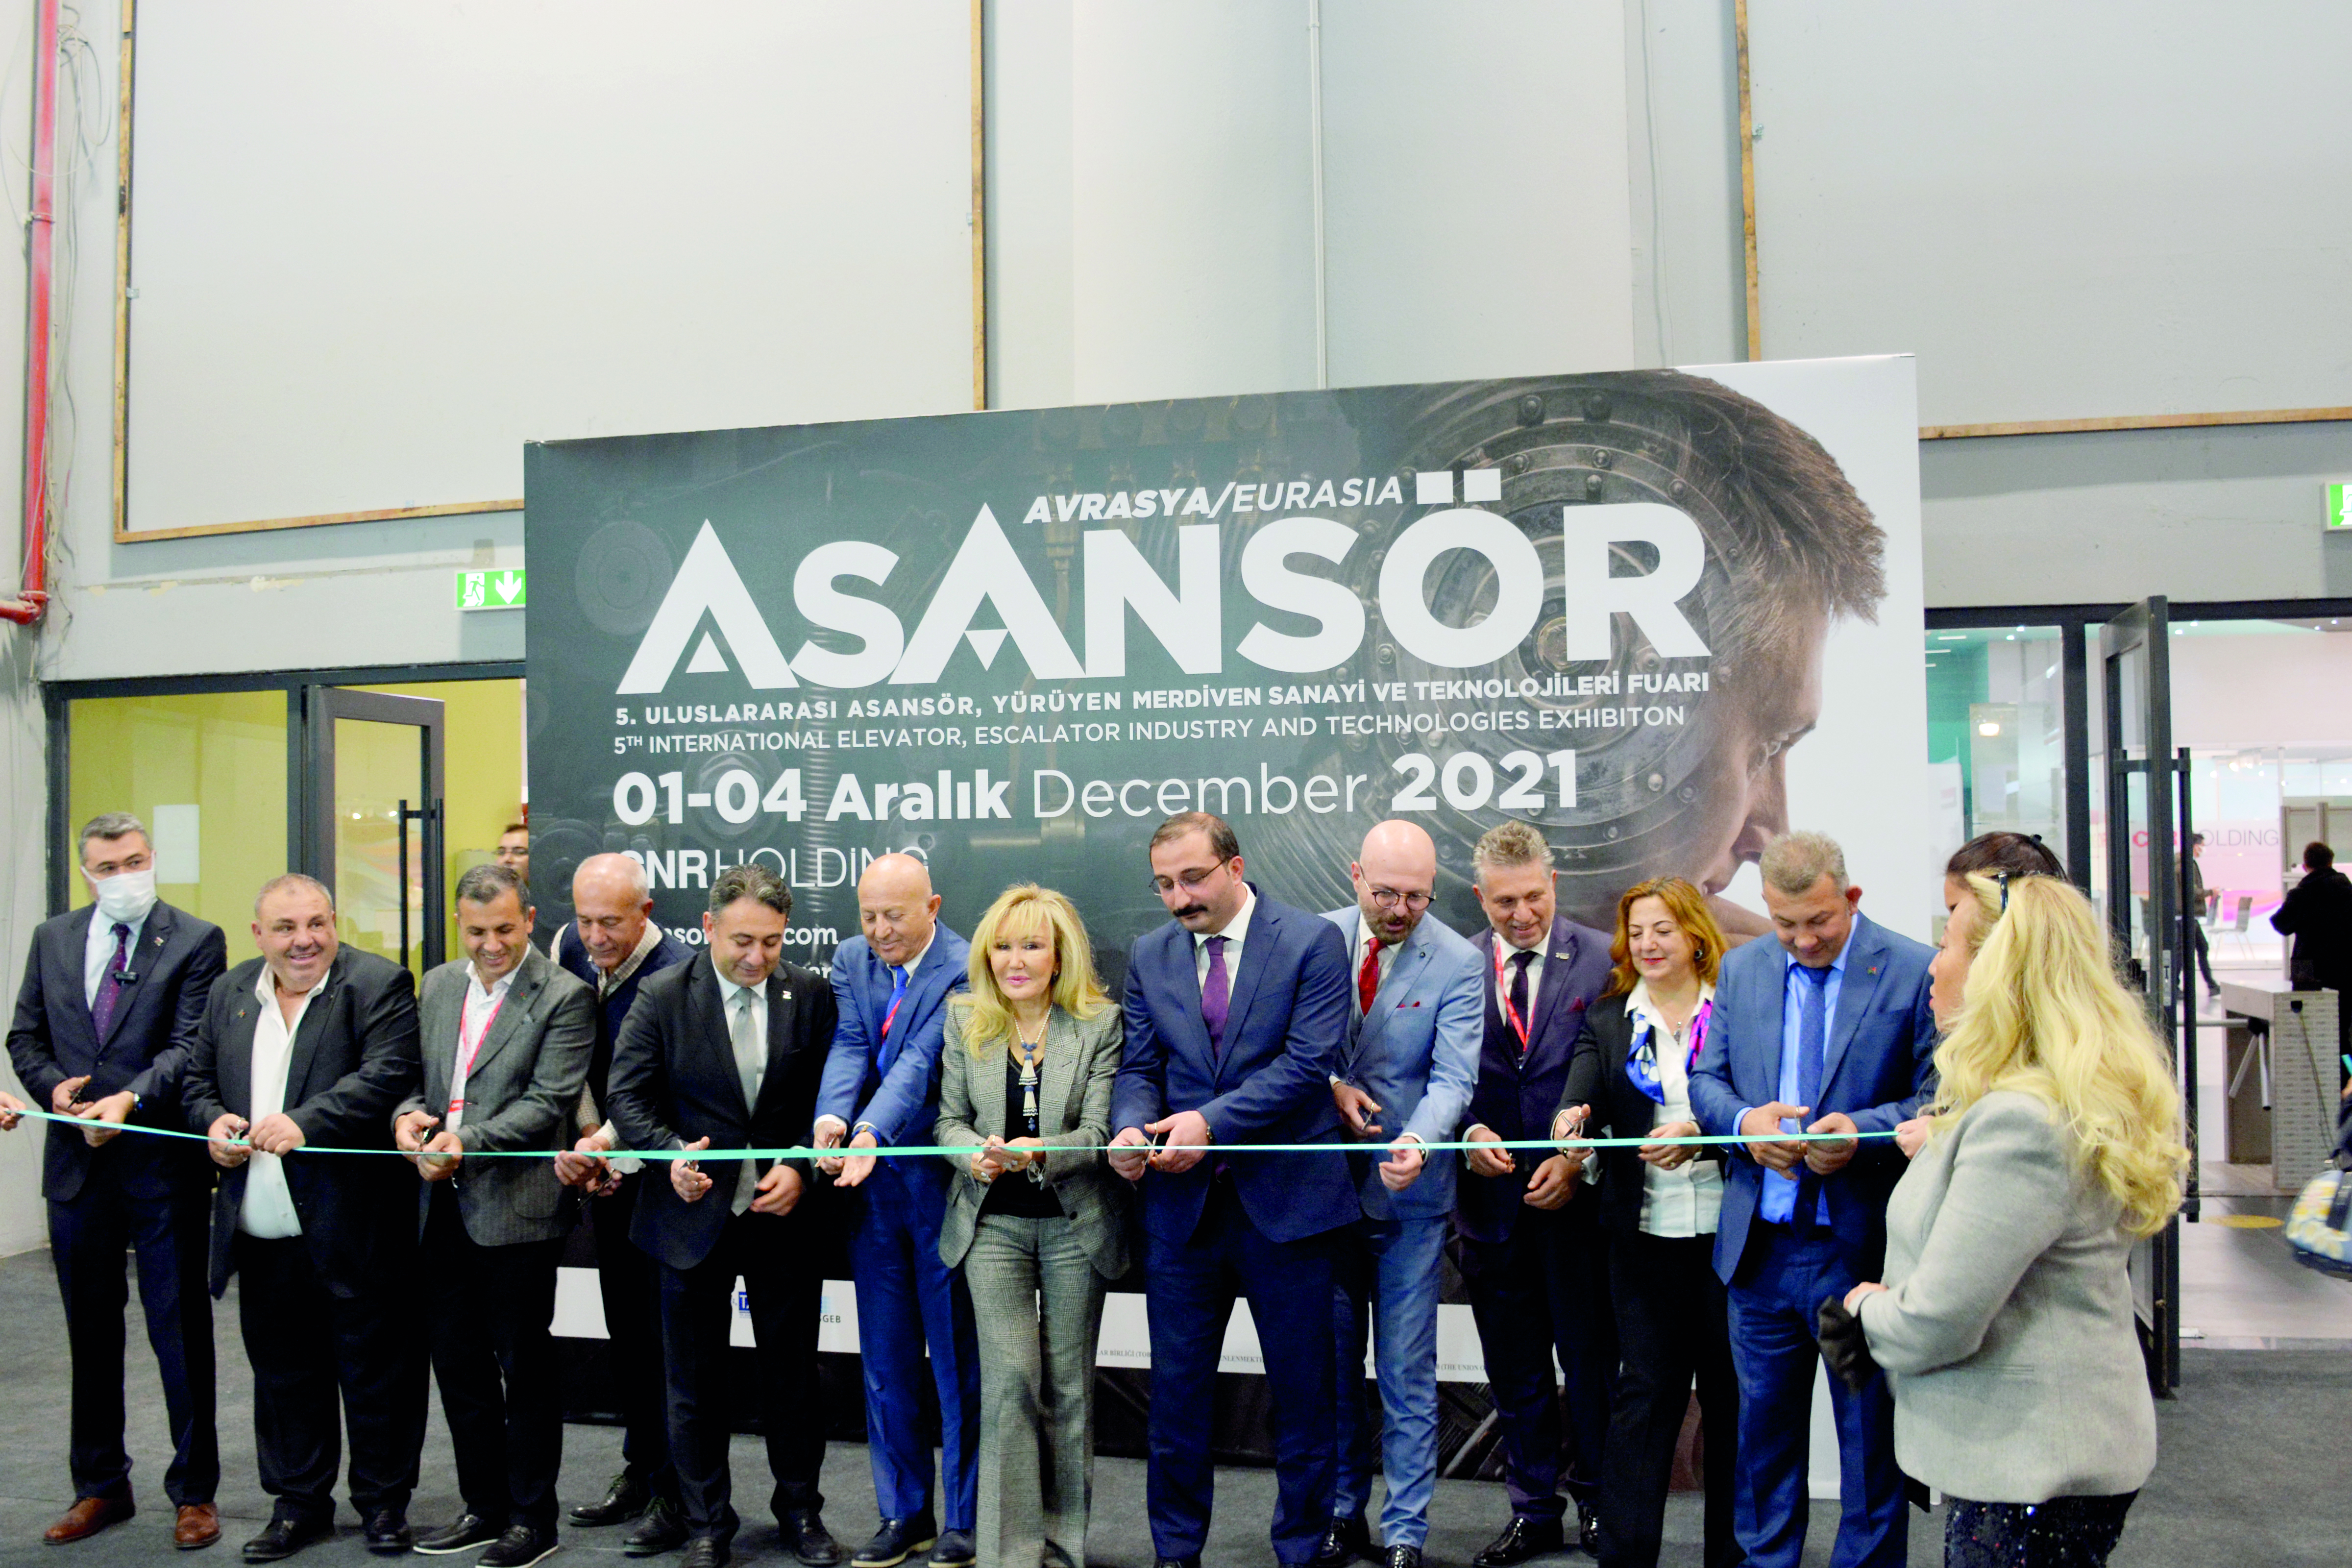  05 Şubat 2022,EURASIA ELEVATOR FAIR THE ELEVATOR INDUSTRY CAME TOGETHER AT THE EURASIA ELEVATOR FAIR AFTER A LONG TIME, Elevator Vizyon Magazine, All What You Are Looking For is On This Site